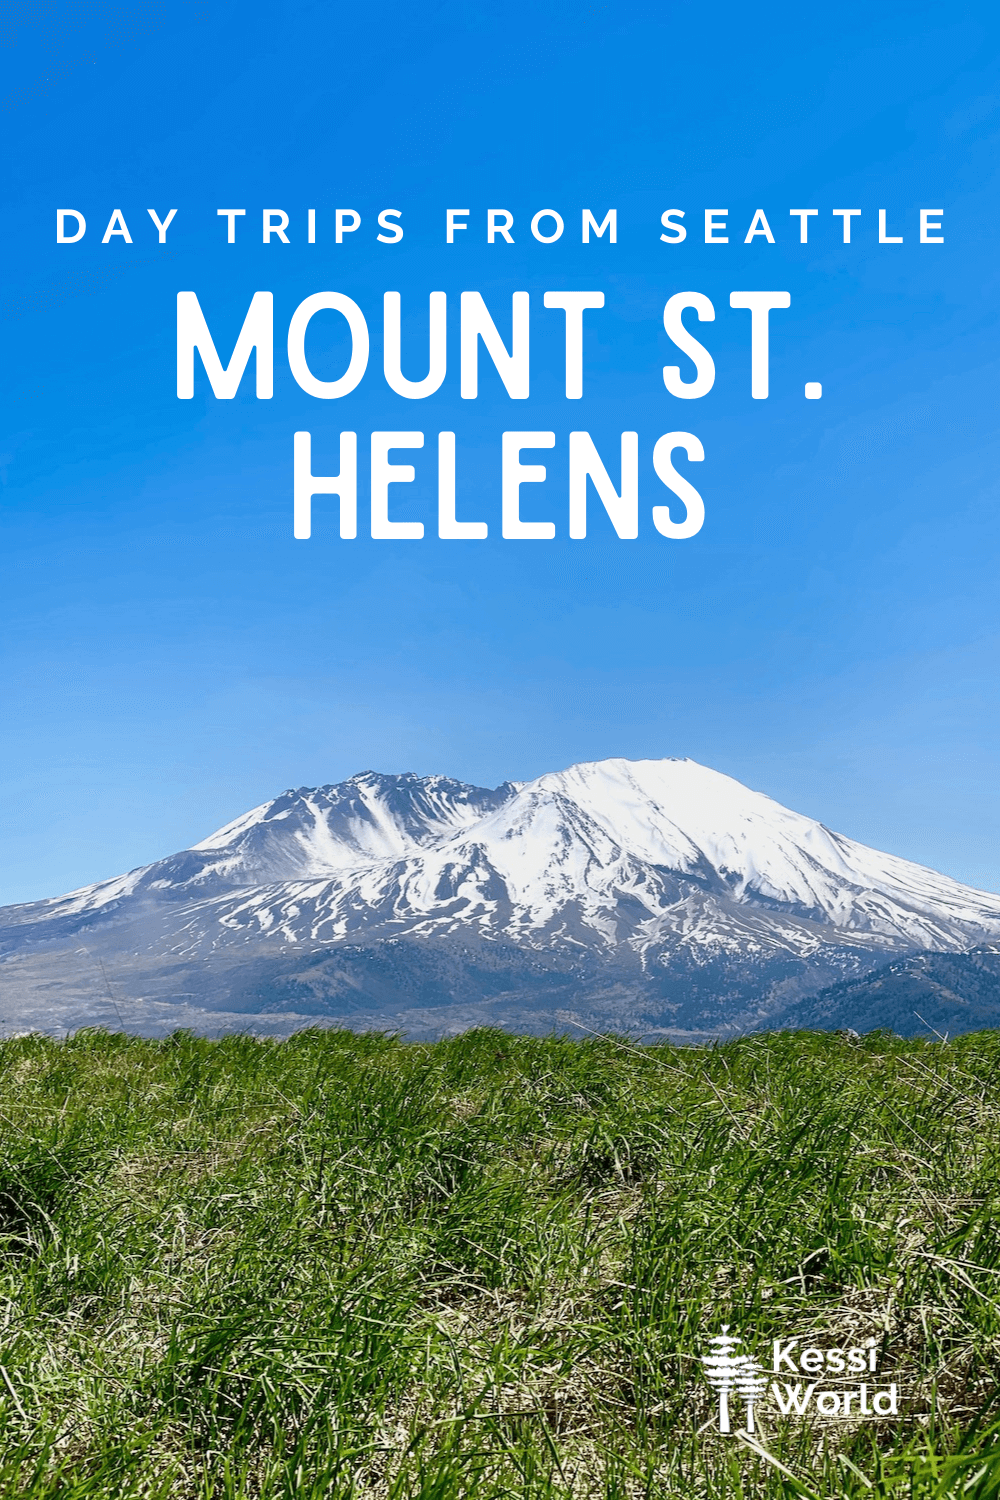 This Pinterest pin highlights one of a great list of day trips from Seattle. Here, a snow-covered Mt. St. Helens rises above a hill of green grass. The sky is blue and there are no clouds. The text on the photo is in white.